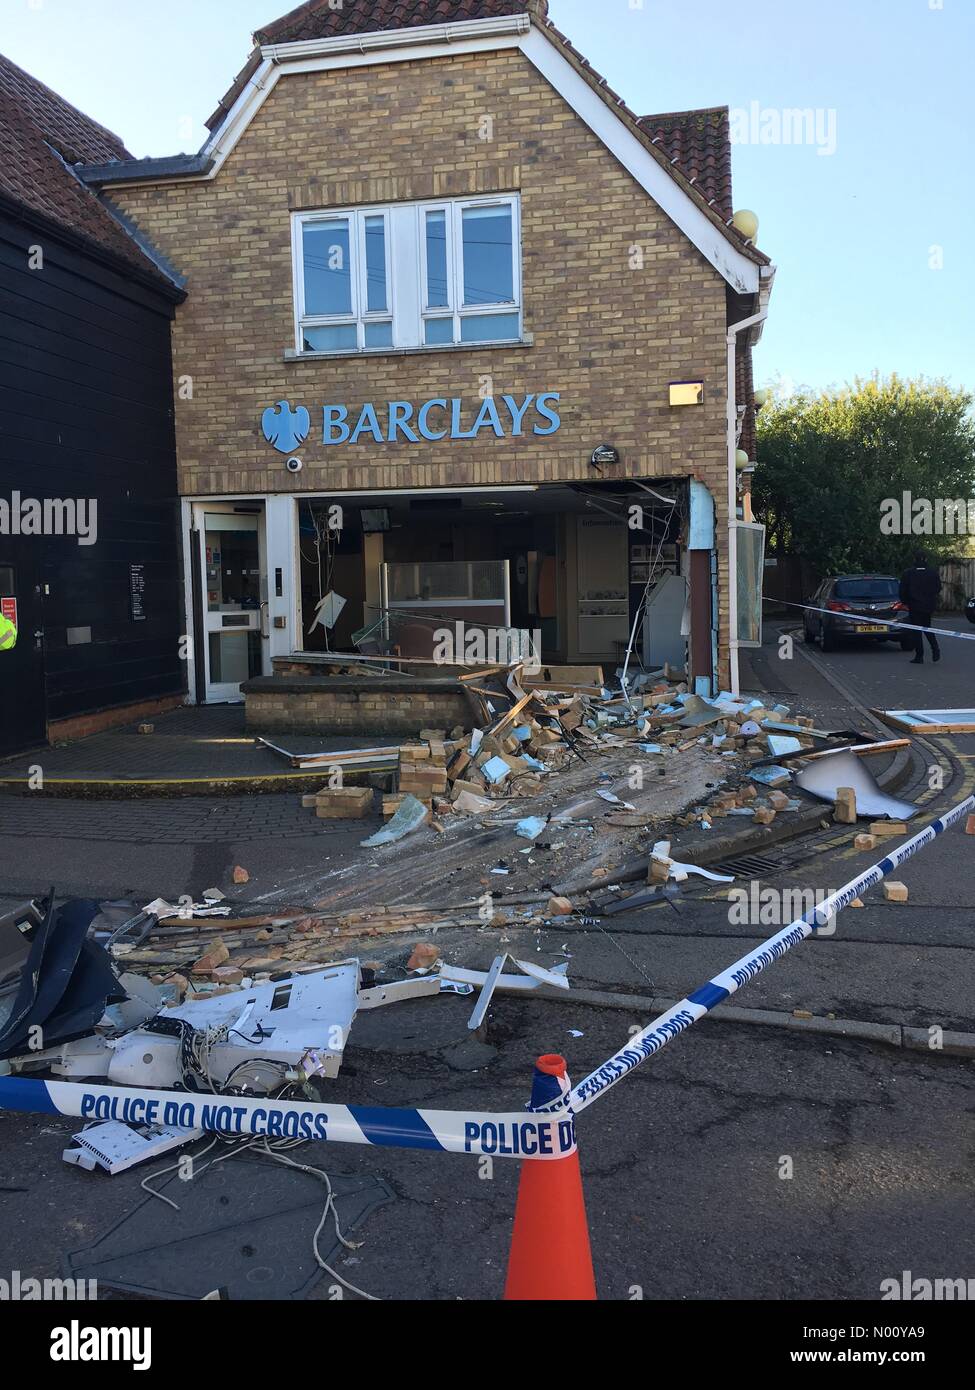 Great Shelford, Cambridgeshire, UK. 29th Oct, 2018. Barclays Bank was ran raided last night at 2am in Great Shelford, Cambridgeshire. Credit: Andrew Brown1/StockimoNews/Alamy Live News Stock Photo